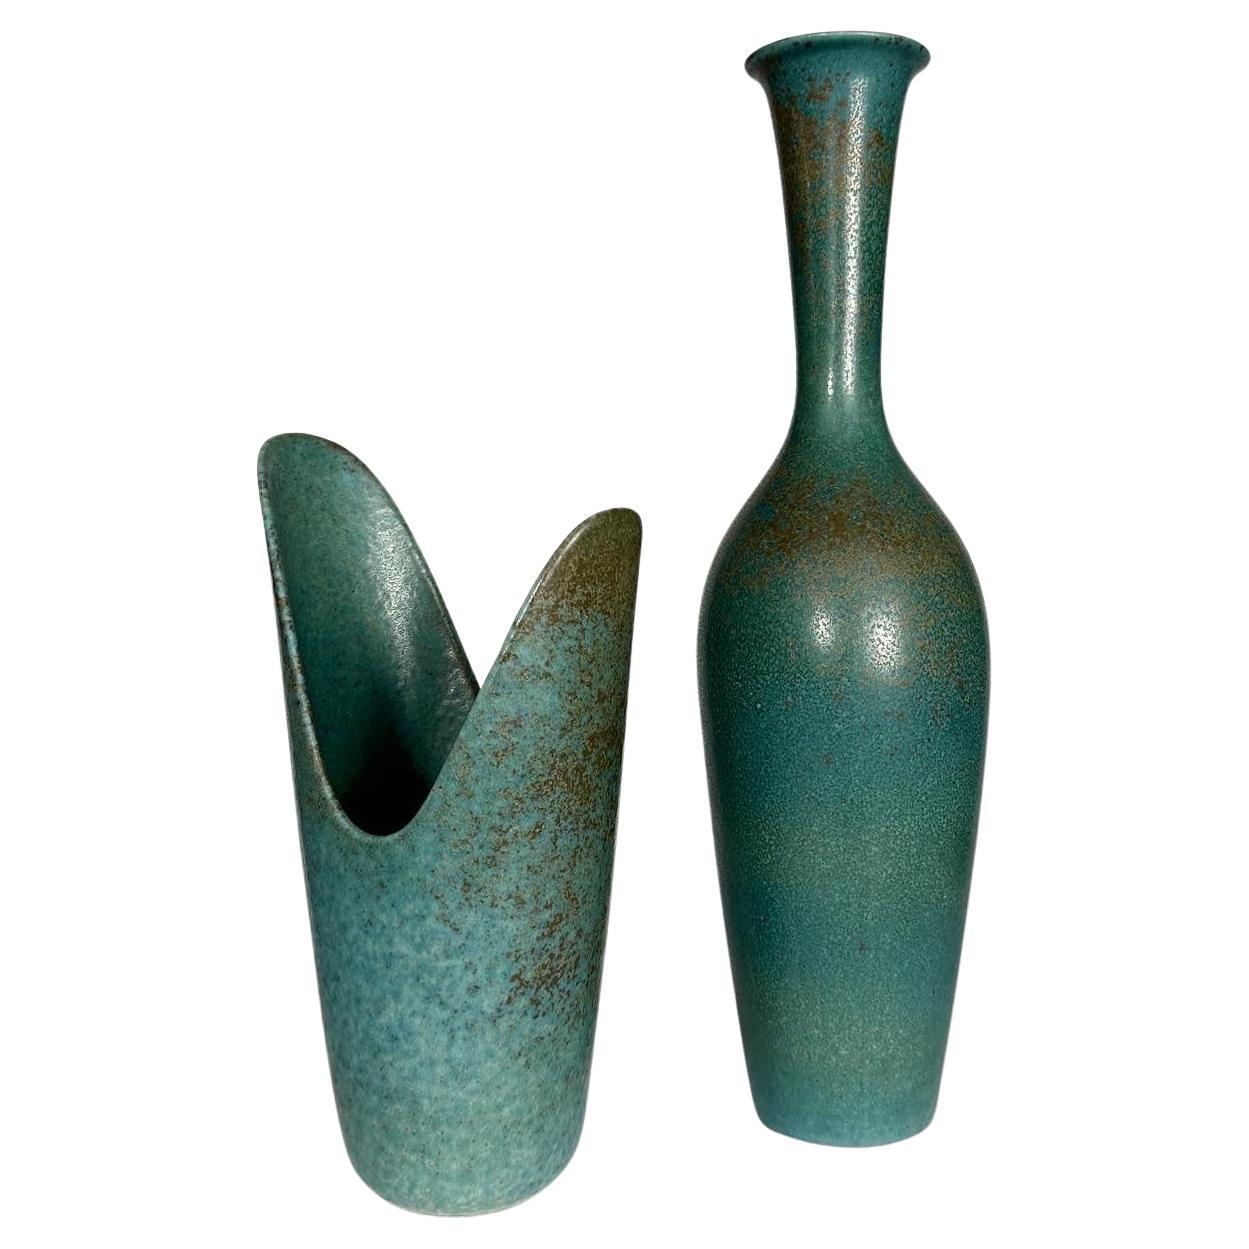 Gunnar Nylund vases in a rare turquoise glaze with brown flecks, hand-thrown stoneware, made at Rörstrand factory in the 1950s. 1st quality sorting.

Left
‚Pike Mouth‘ vase, model ‚ARZ’, very good condition.
Heigth: 18.5 cm
Diameter: 11